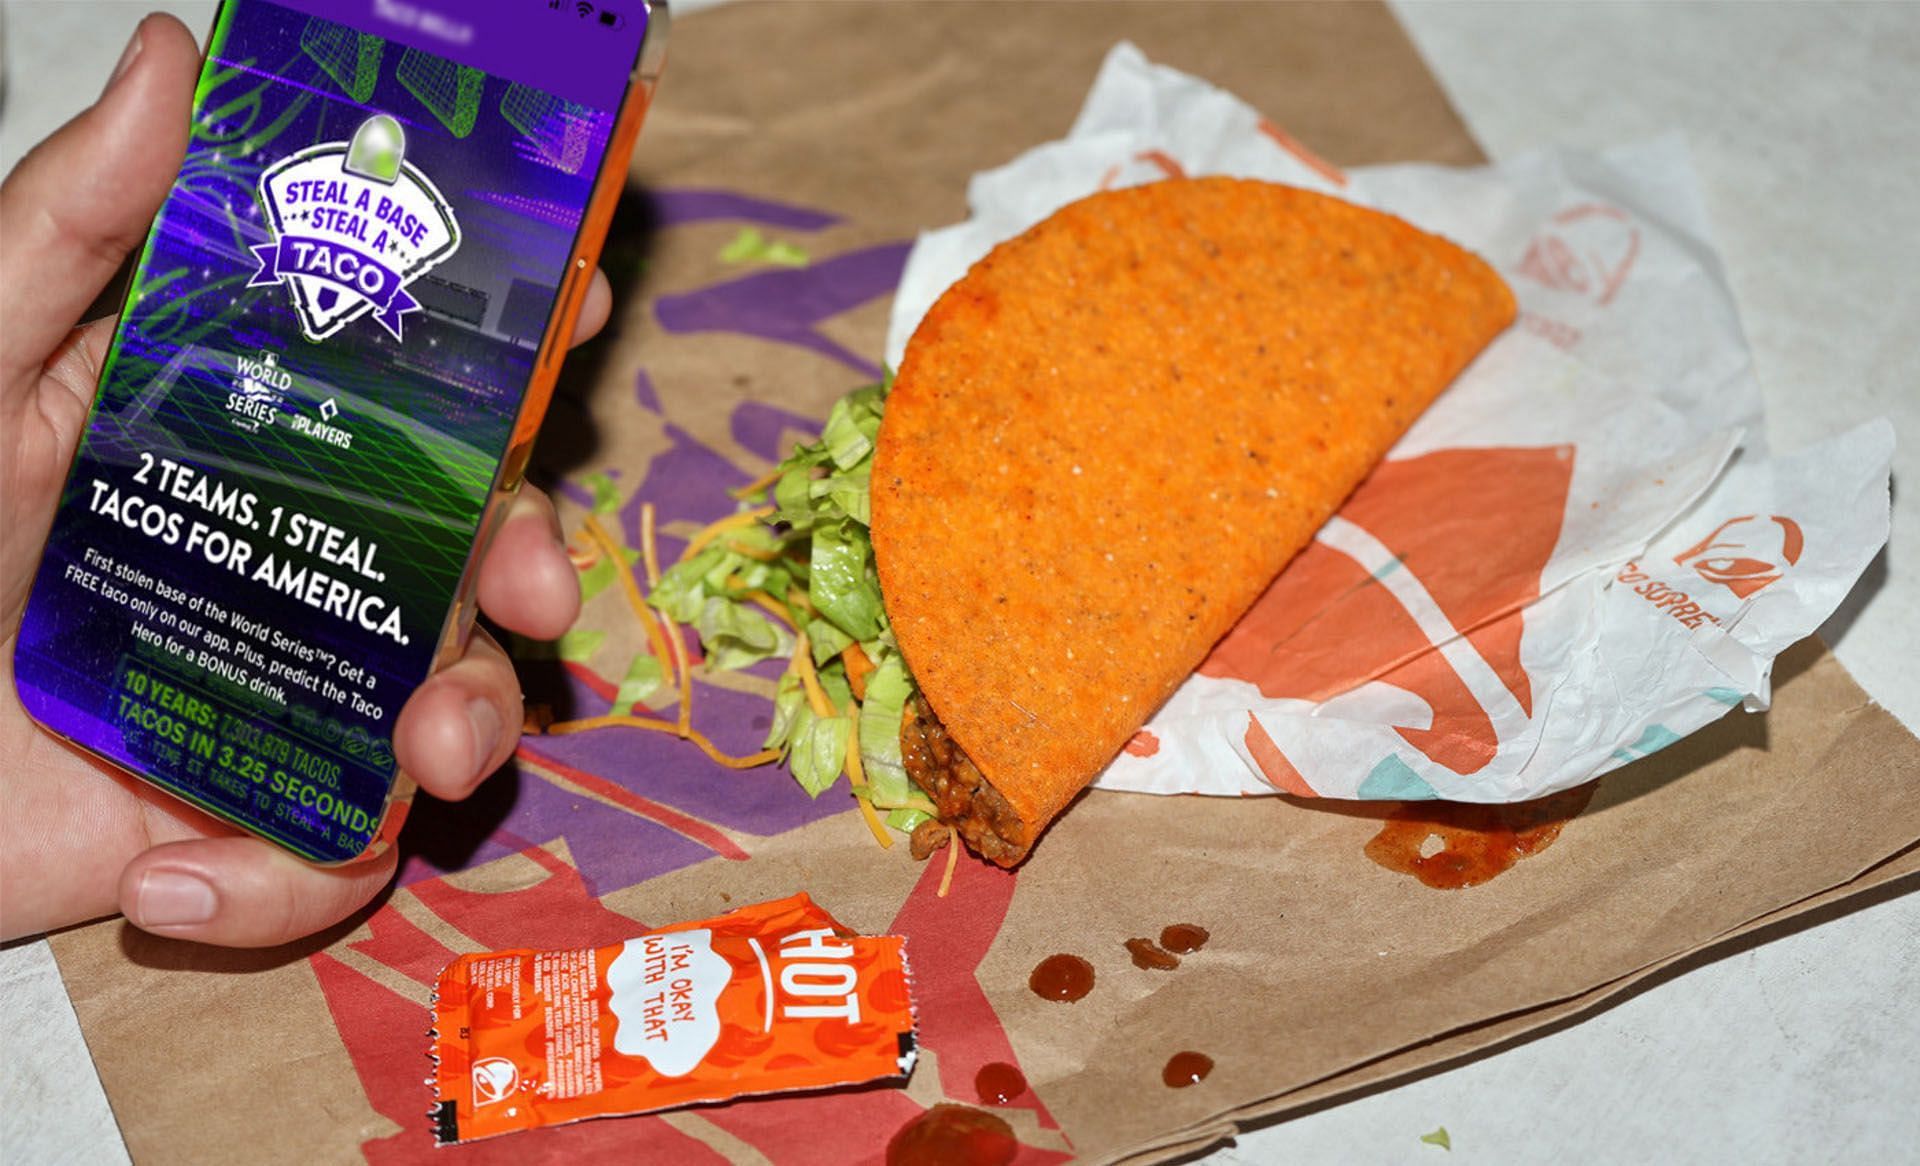 Taco Bell World Series free tacos How does the "Steal a Base" deal